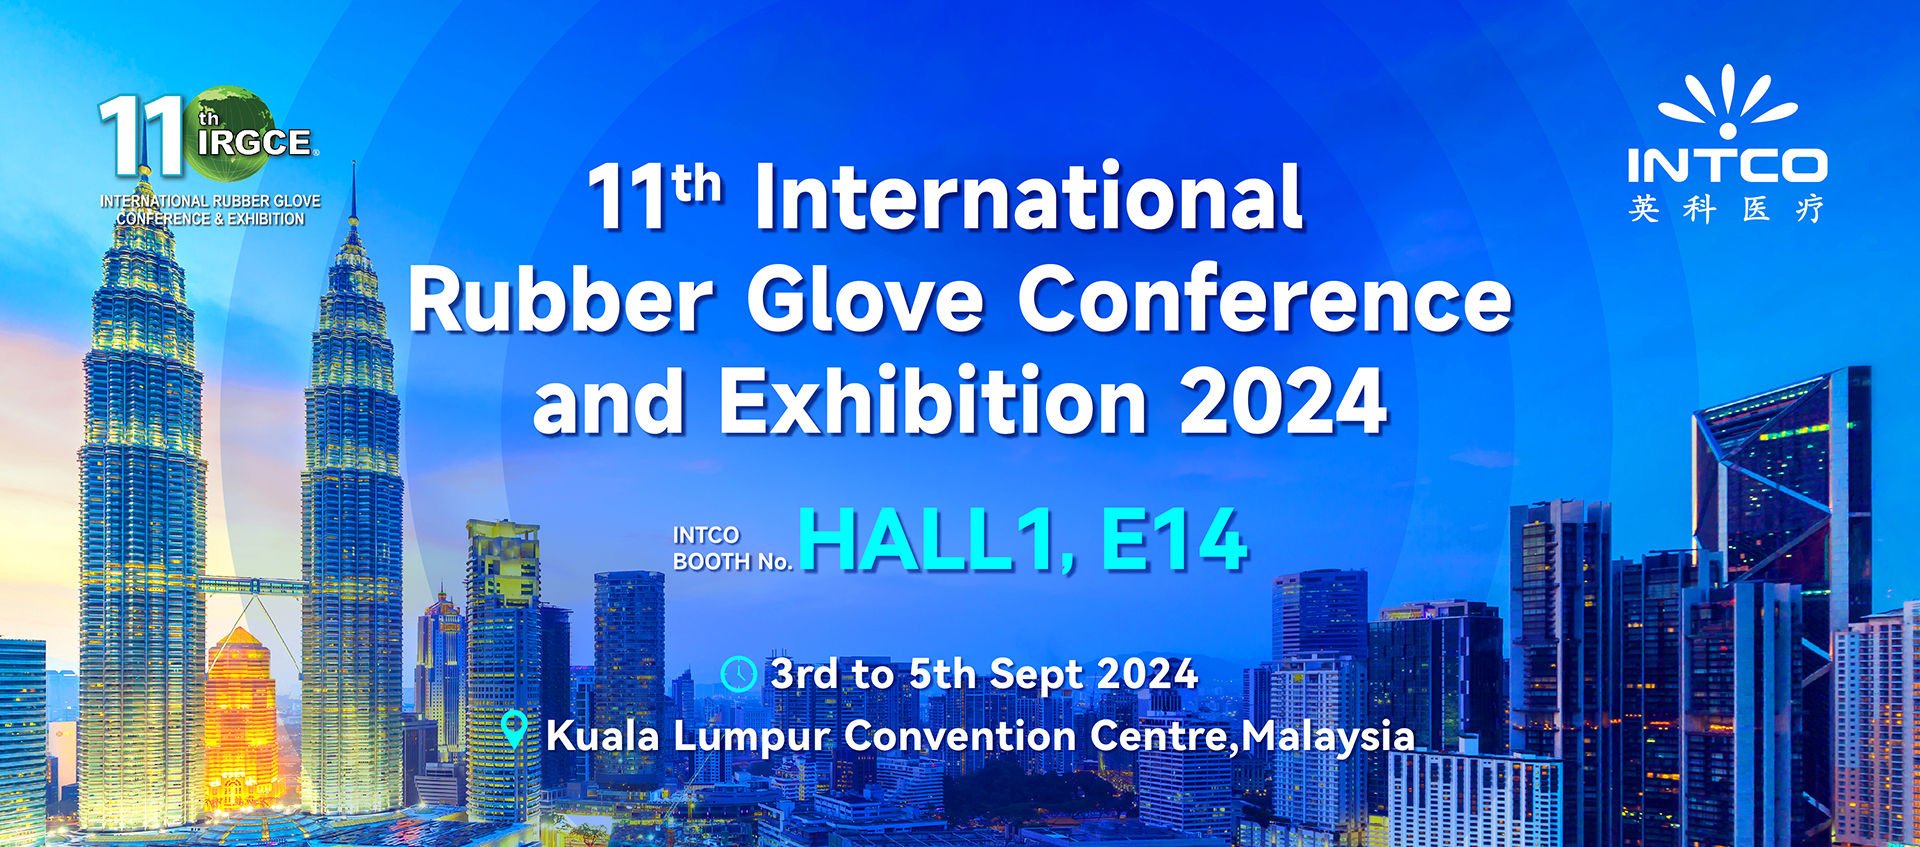 11th International Rubber Glove Conferenceand Exhibition 2024